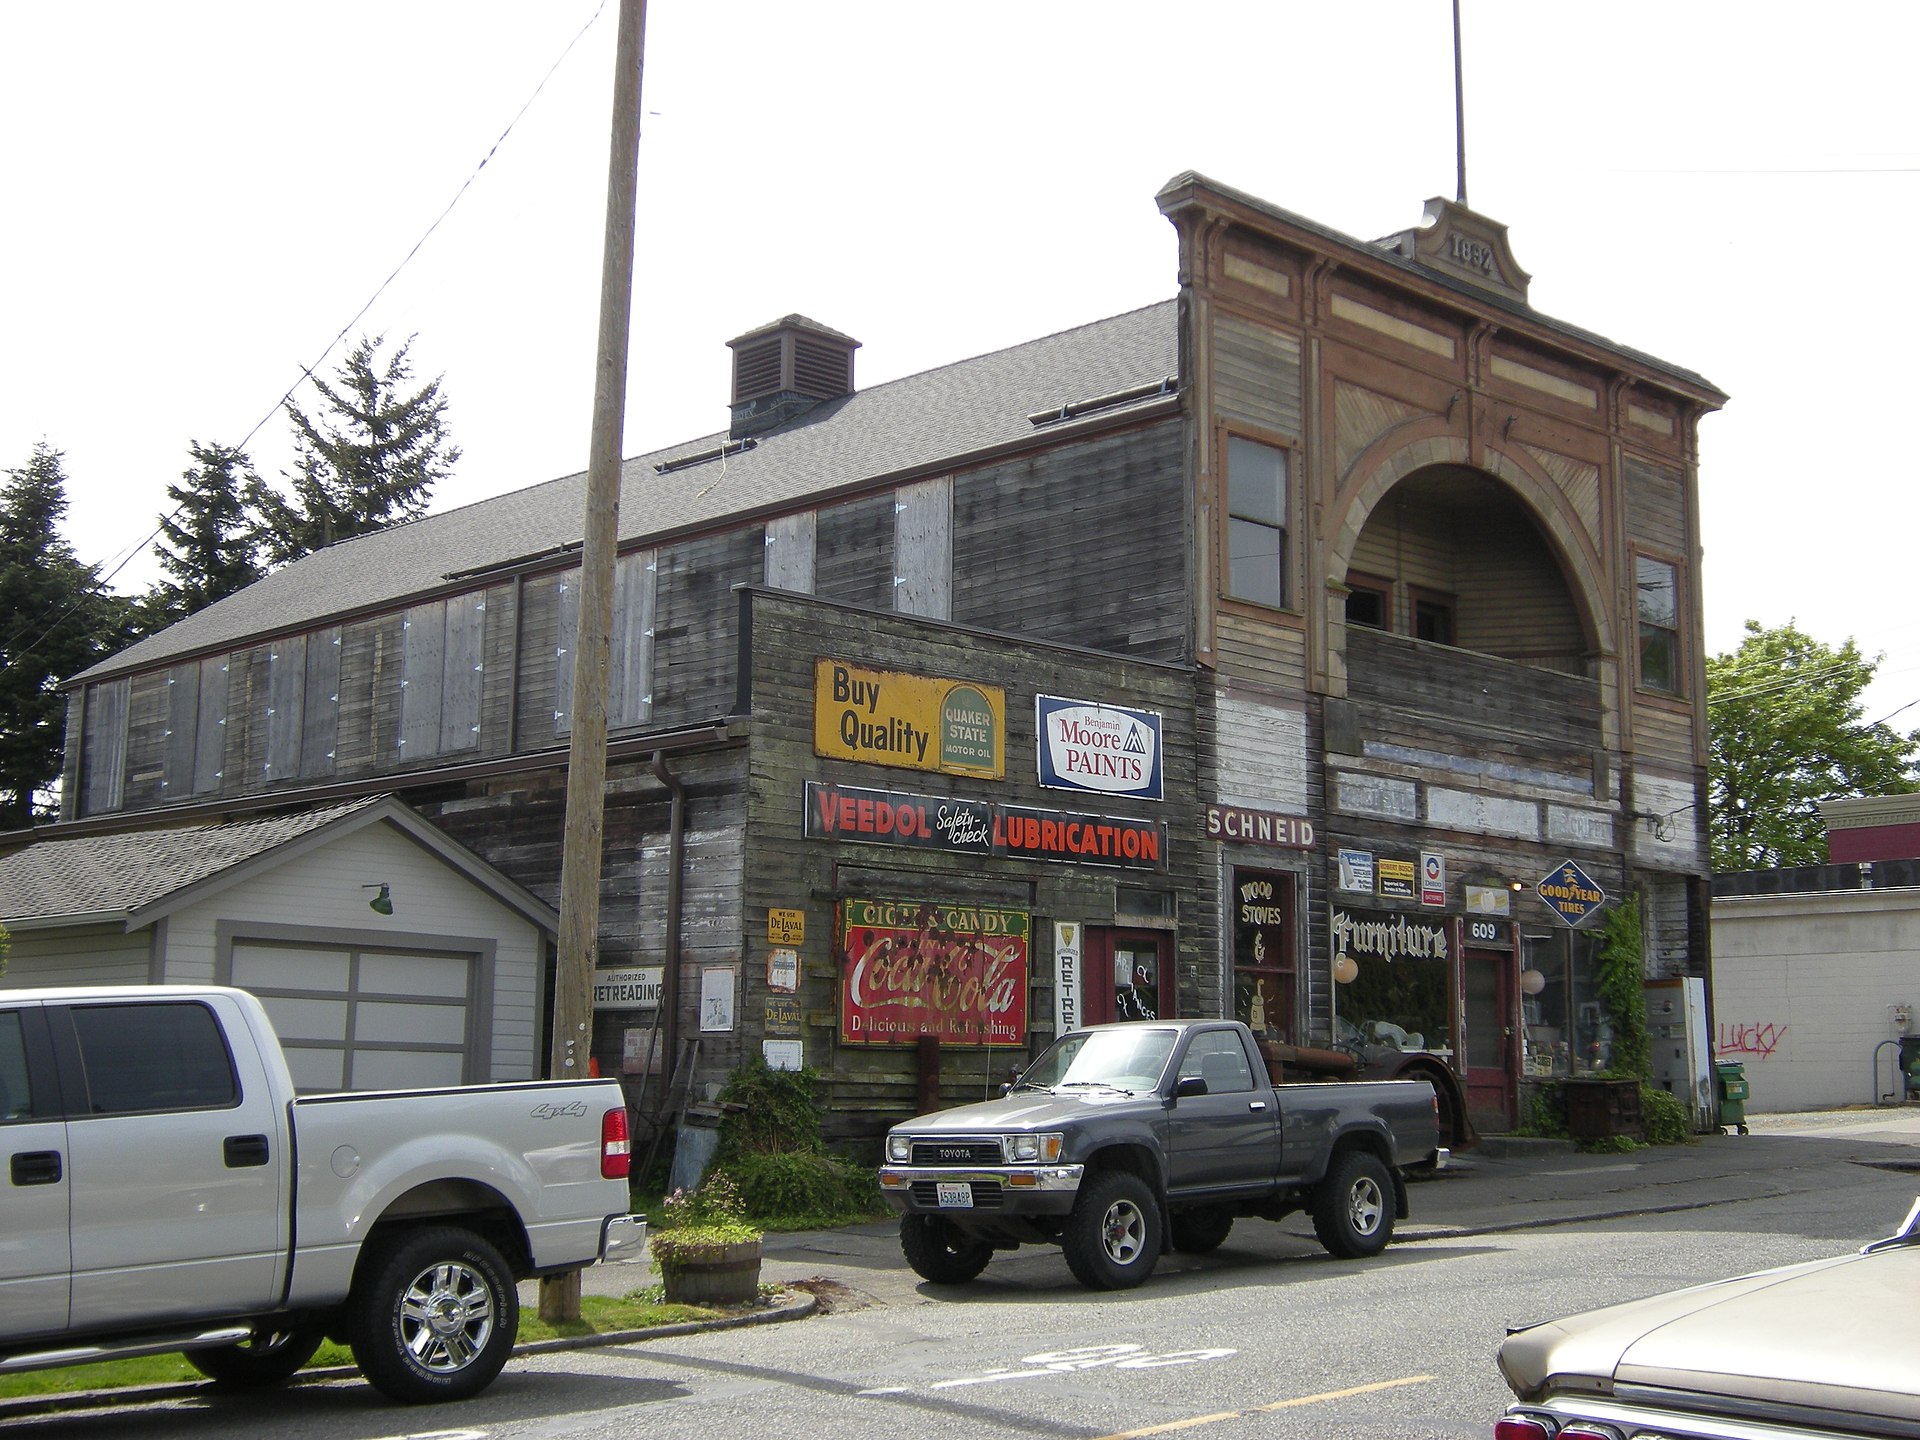 The Alcazar Opera House, built in 1892, later became an agricultural supply store and is now one of Snohomish's many antiques stores.